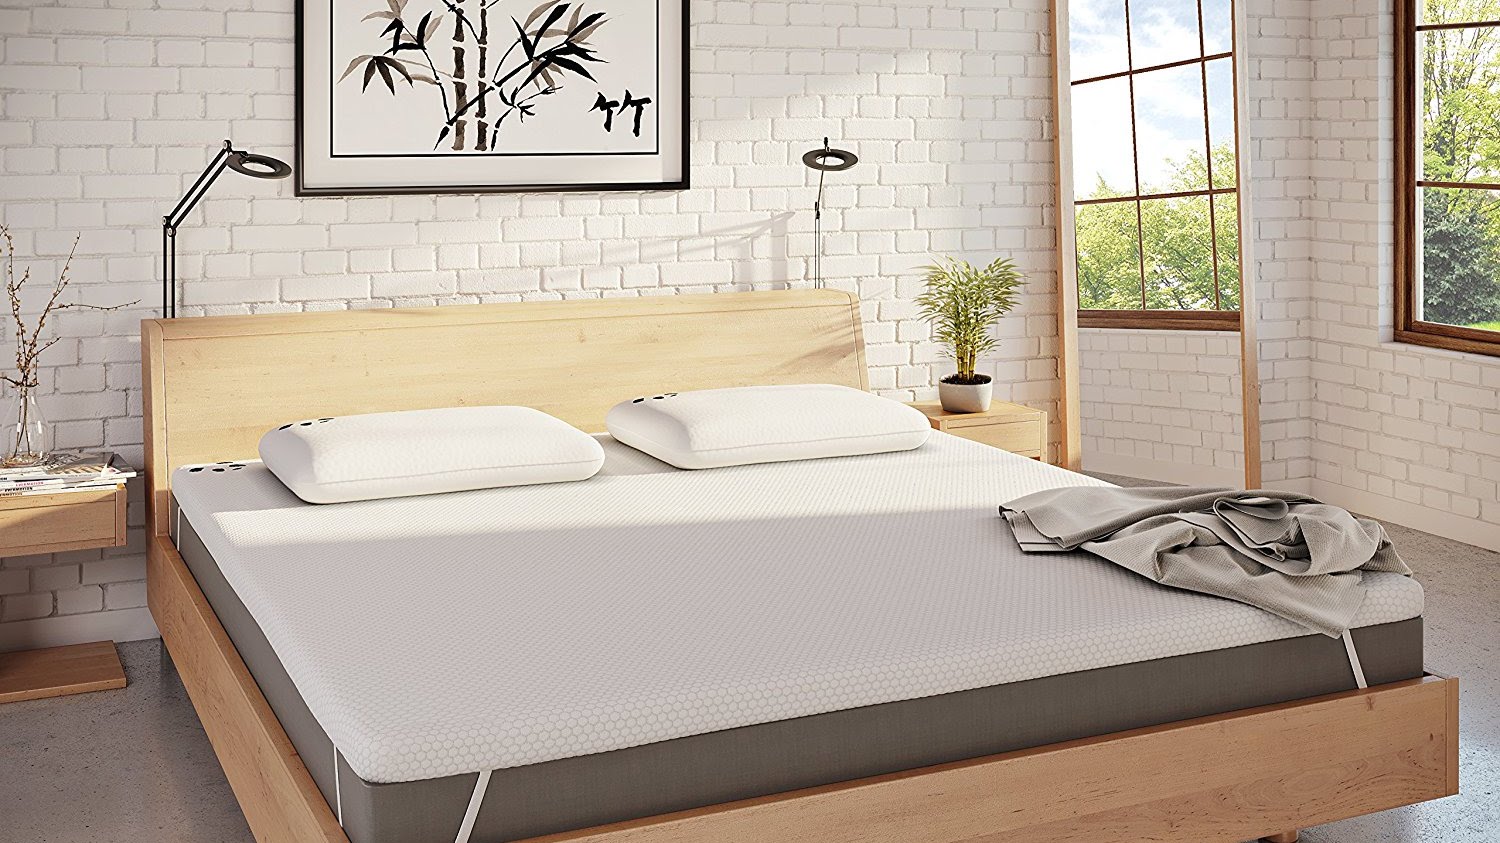 10 Reasons to Make the Switch to Foam Mattresses and Bedding